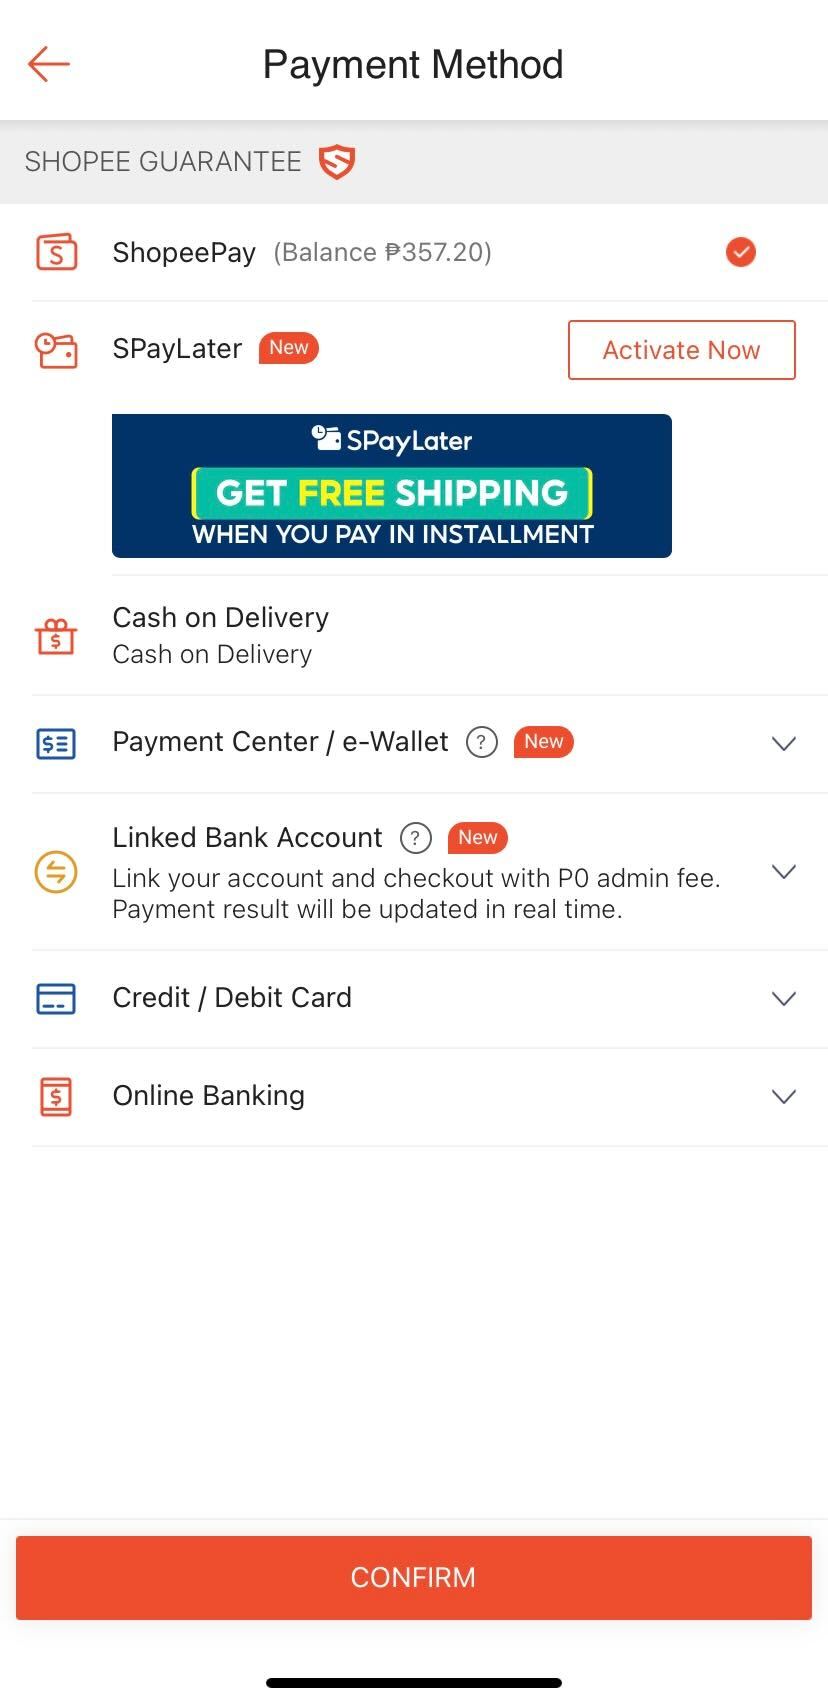 How to Use ShopeePay: Activate, Pay, Top Up, and More